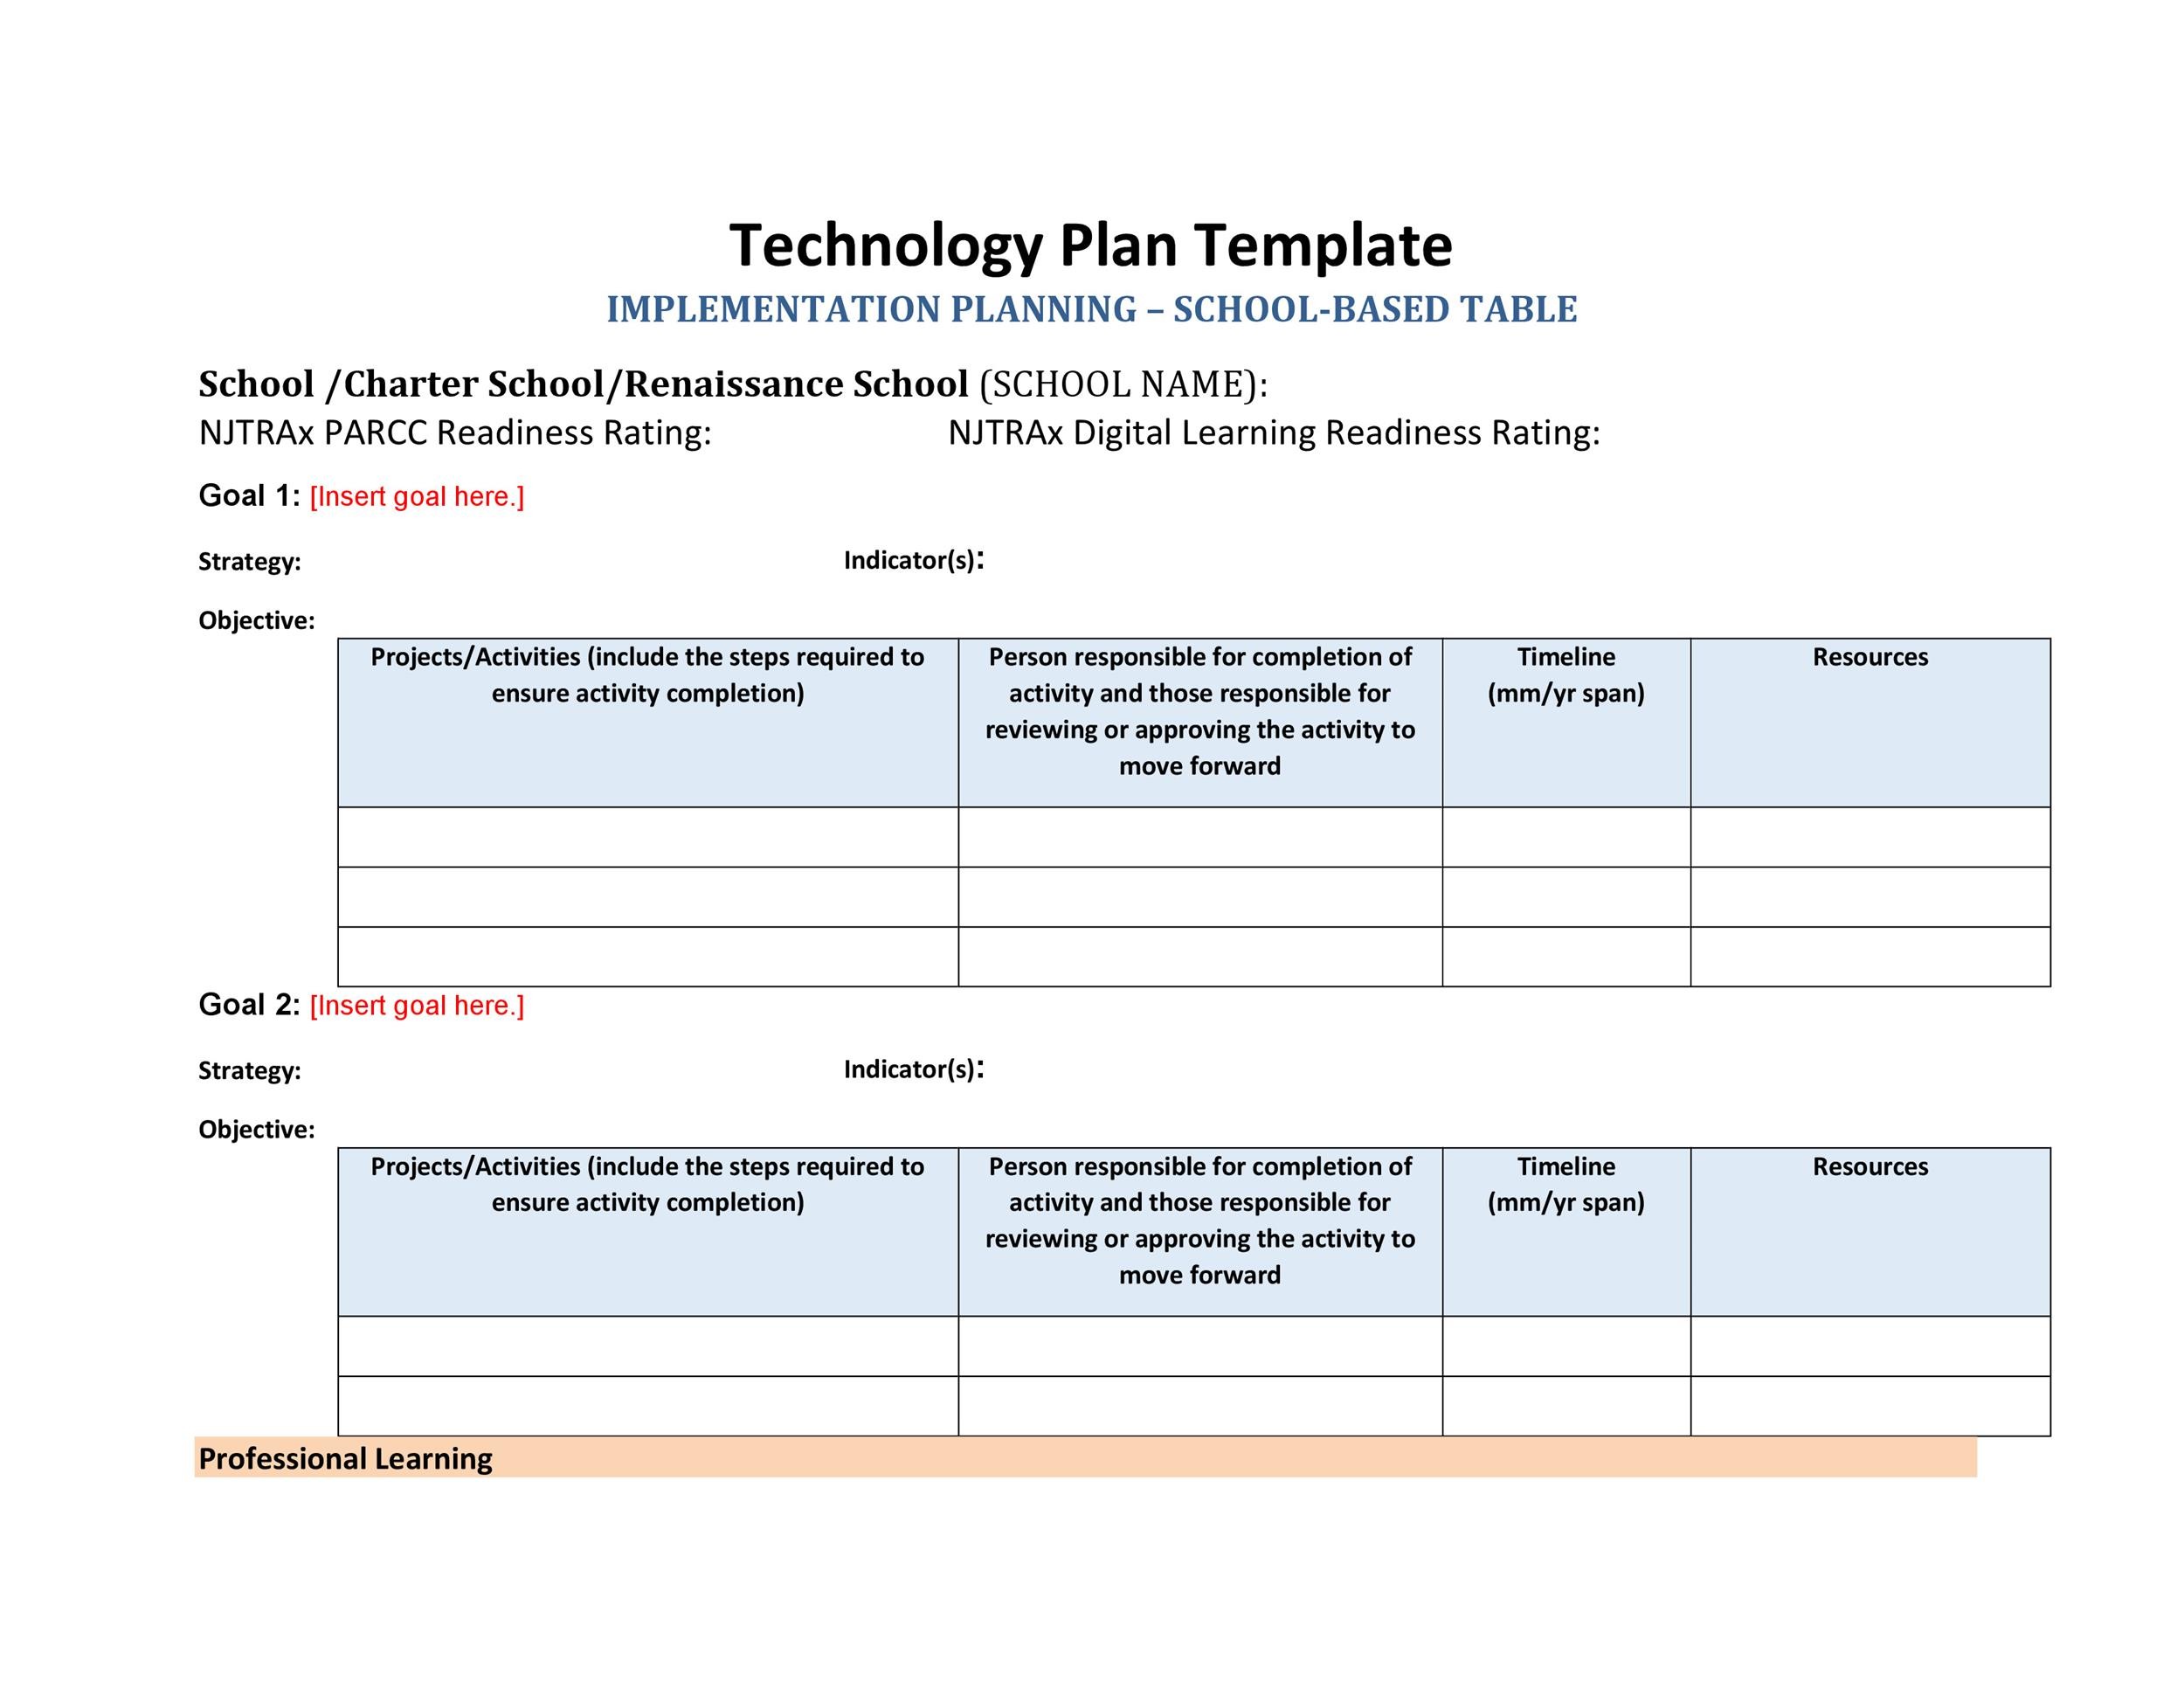 43 Step by Step Implementation Plan Templates ᐅ TemplateLab